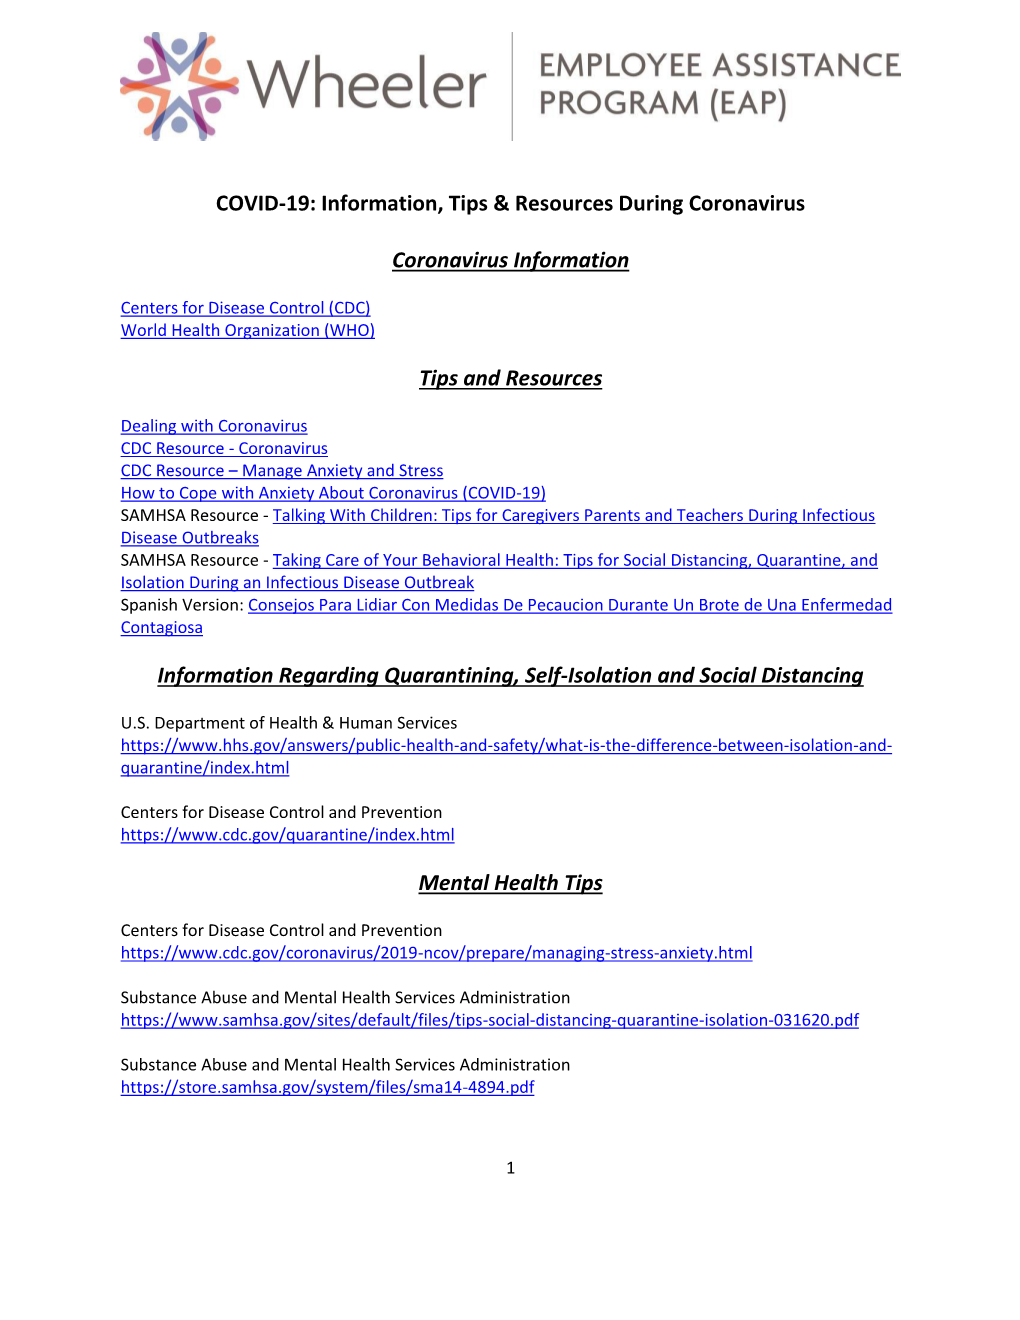 COVID-19: Information, Tips & Resources During Coronavirus